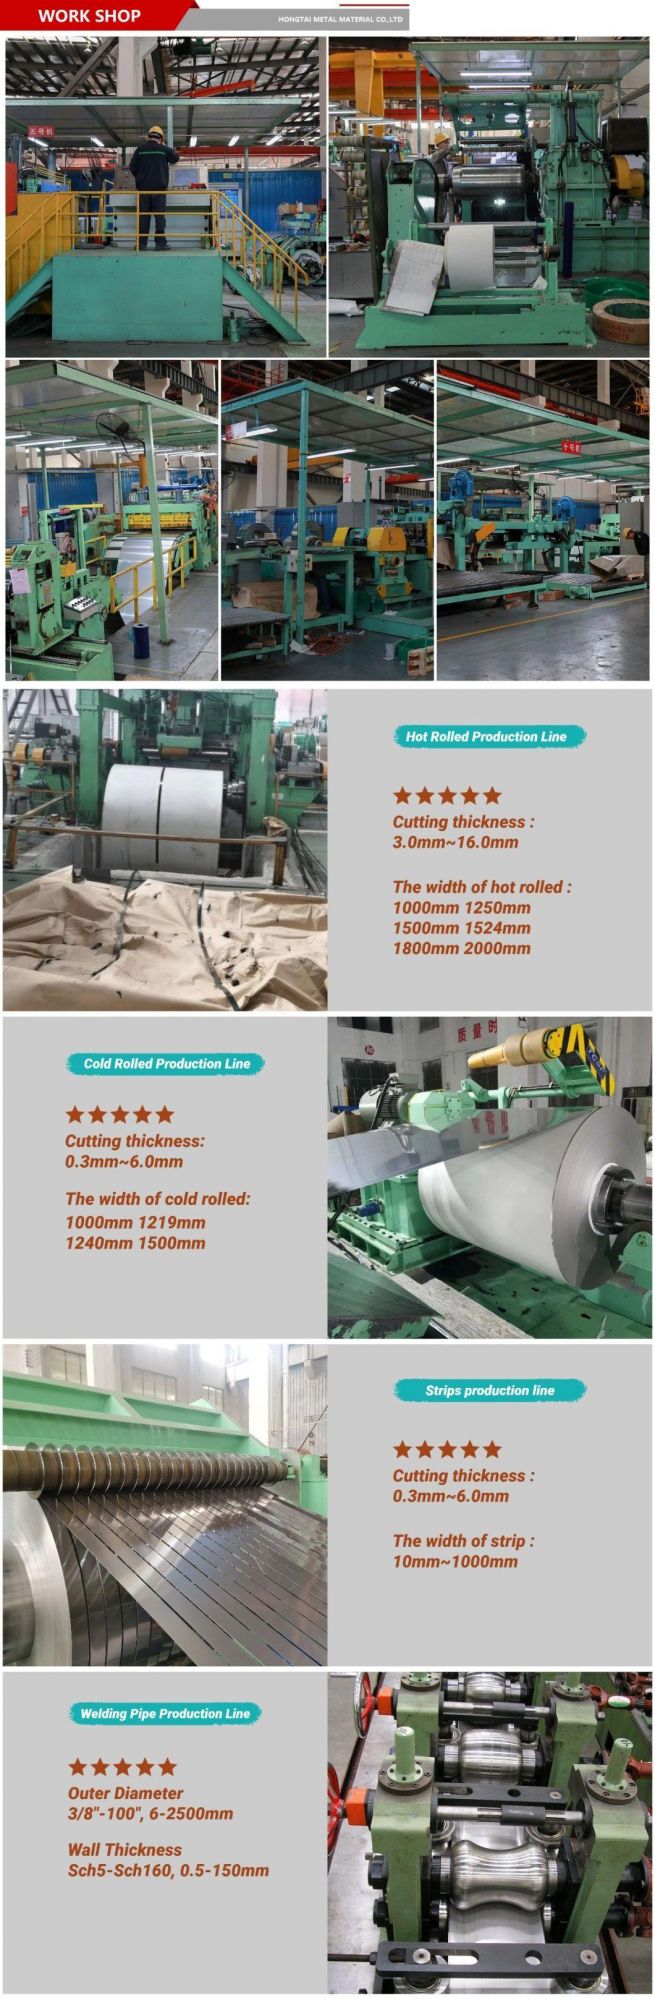 Press-Fitting Quick Installation Stainless Steel Water Round Pipe Food Grade for Sanitary Ss Welded Water Tube